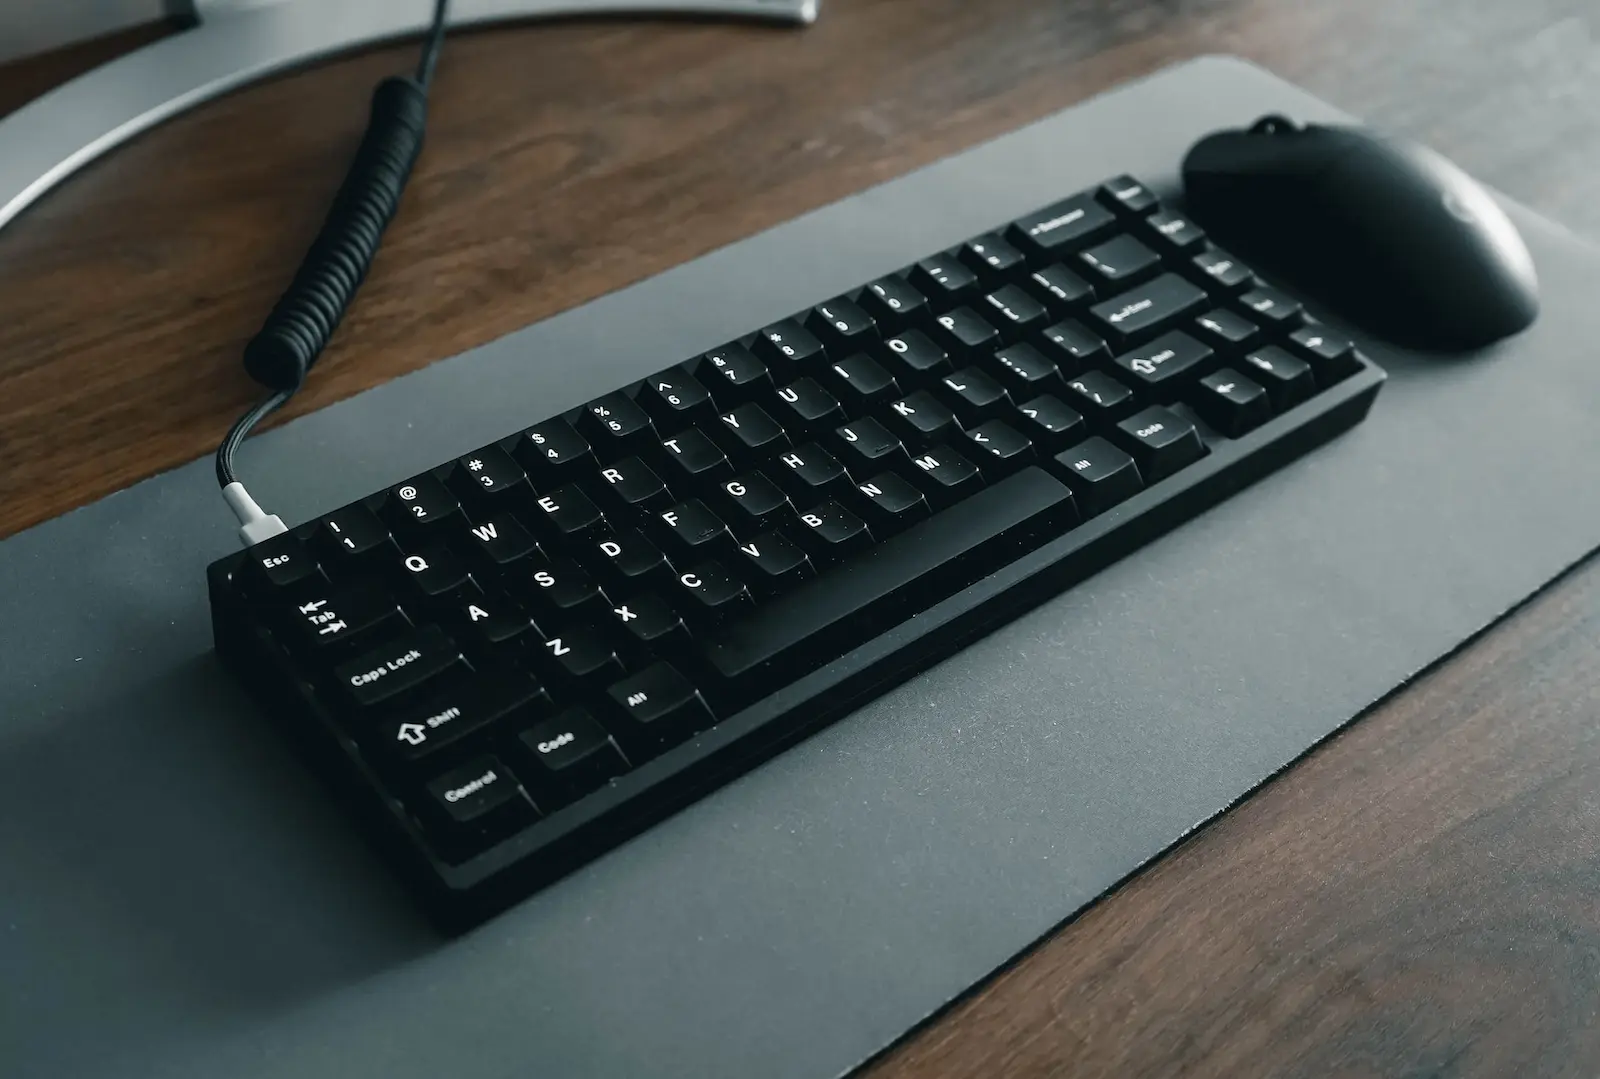 Keyboard and mouse on a desk